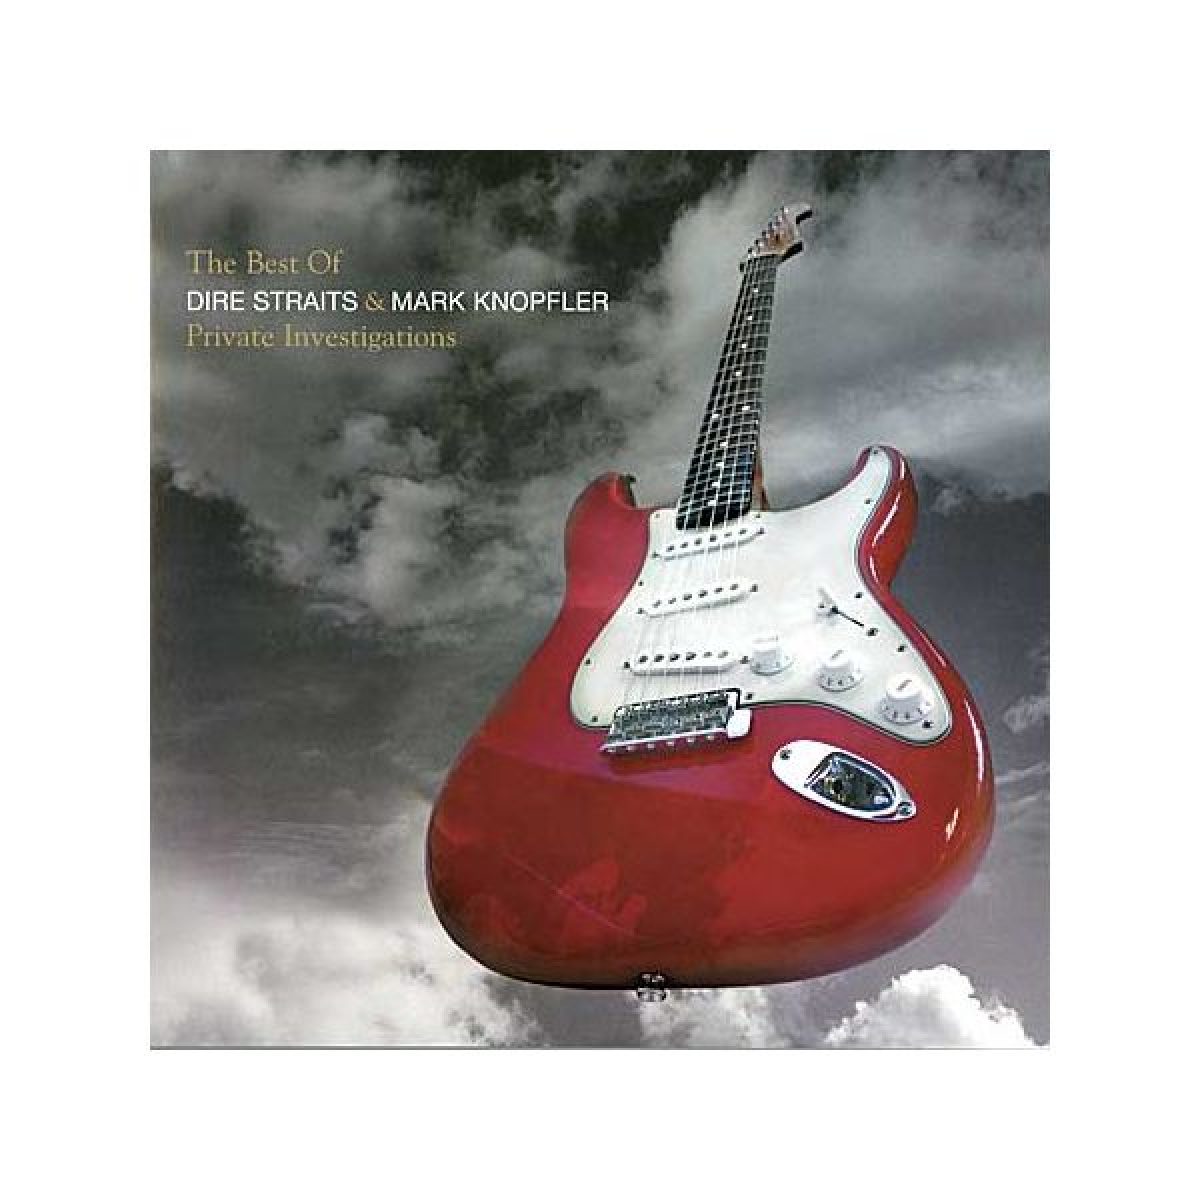 Dire Straits & Mark Knopfler, Private Investigations (The Best Of)